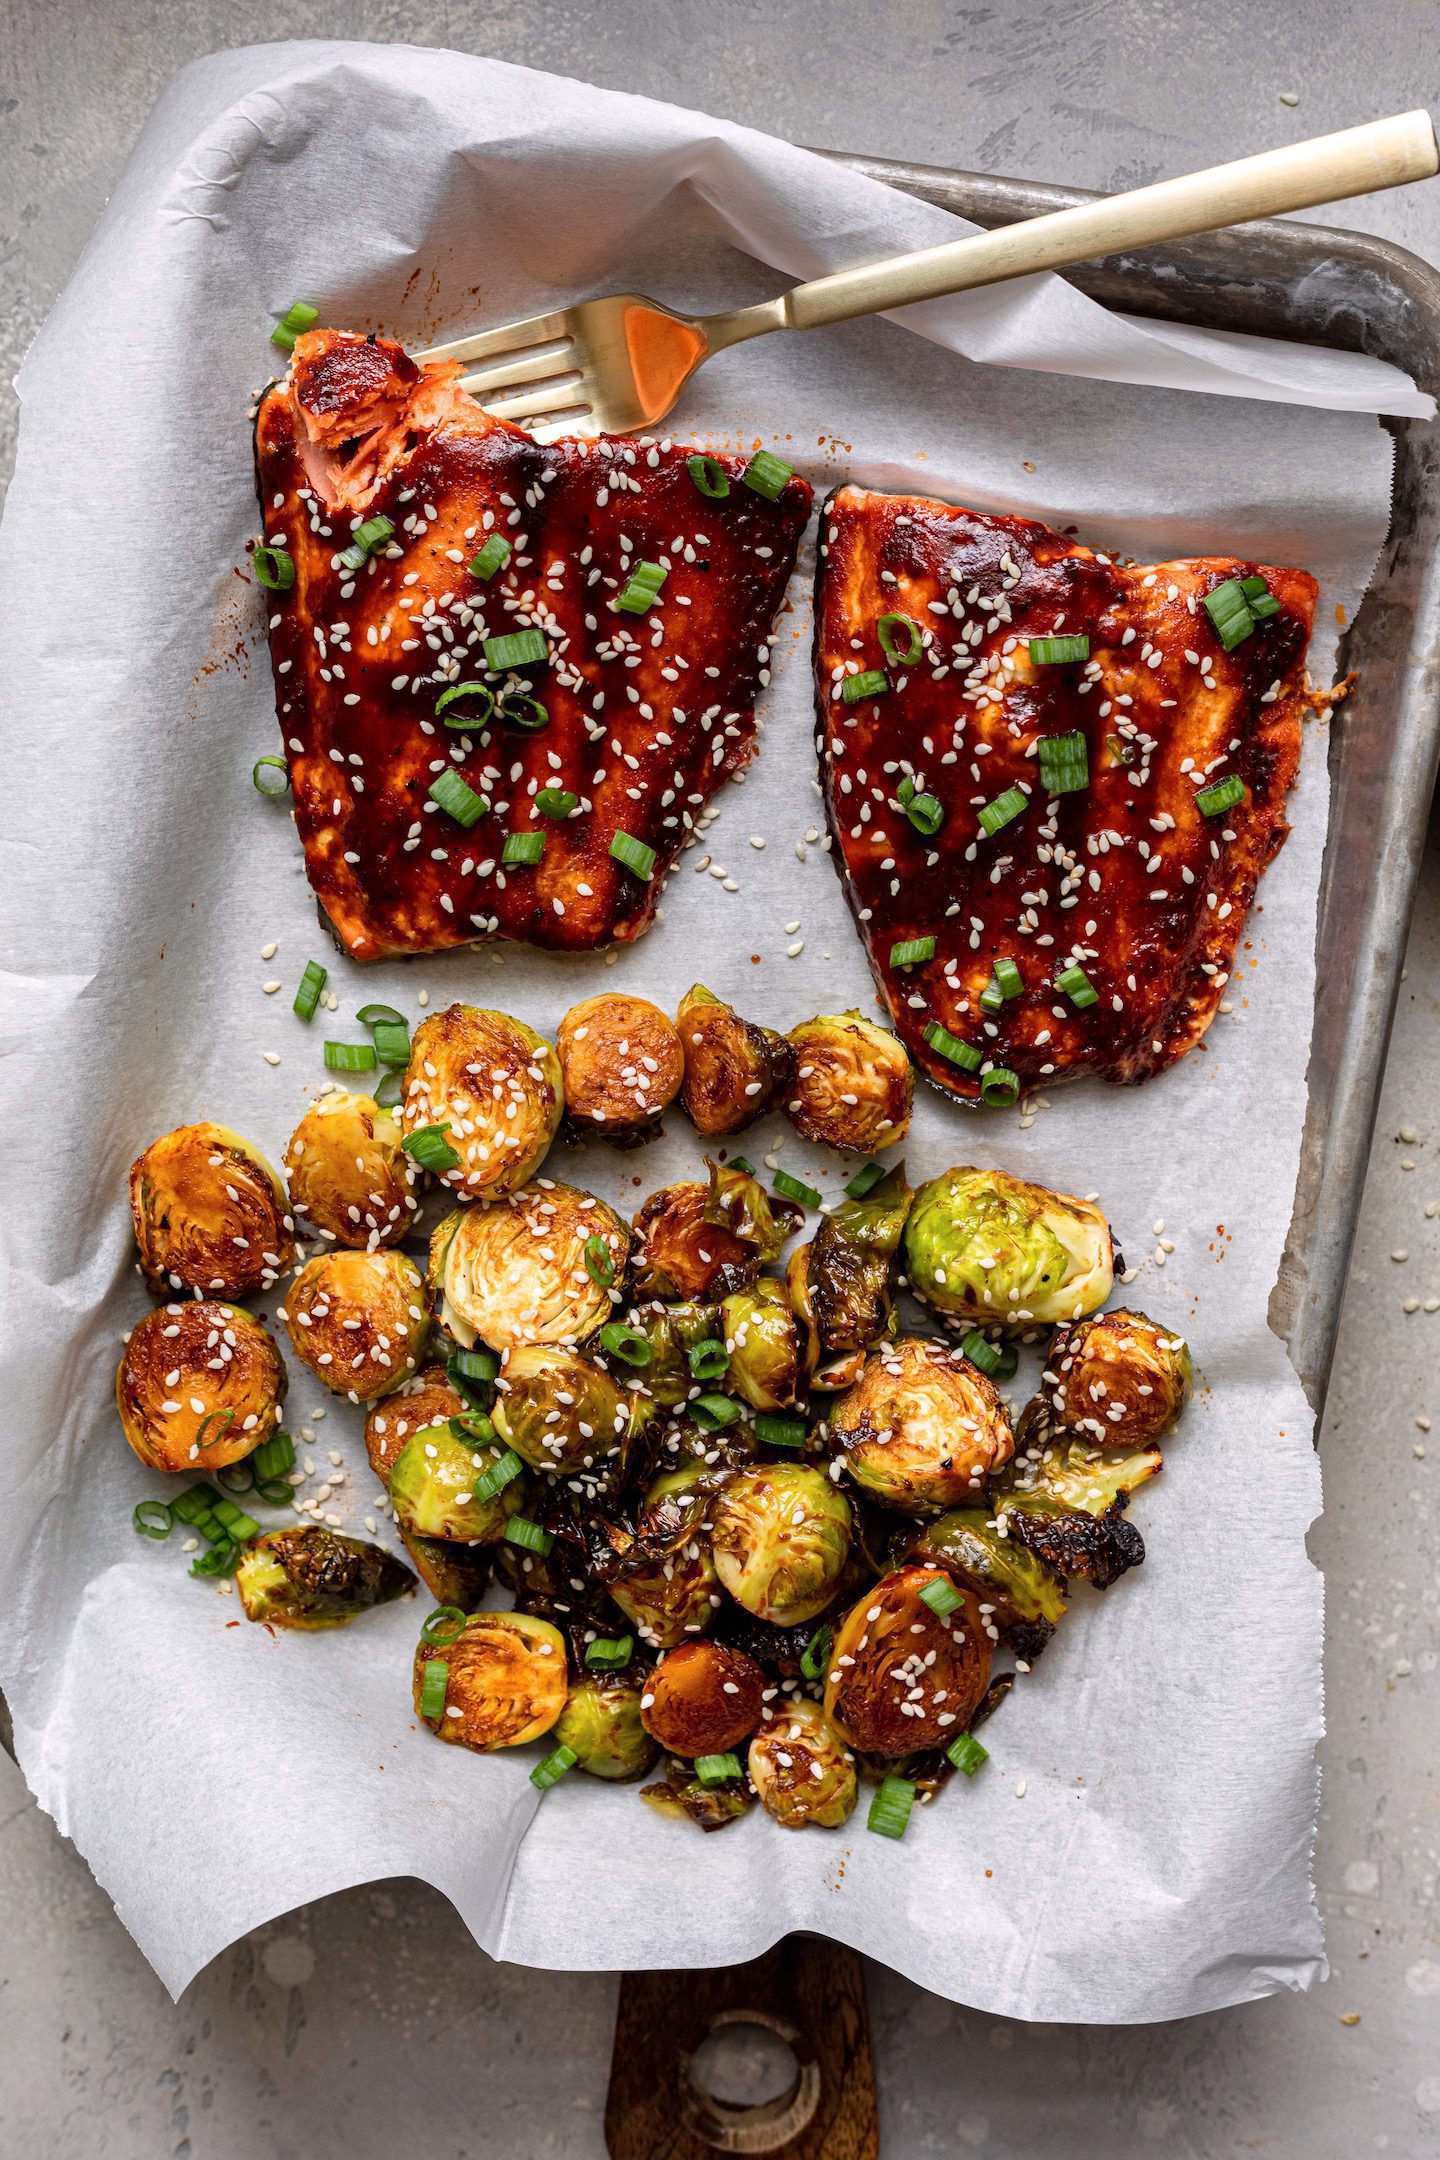 Asian BBQ Salmon And Brussels Sprouts For Two - Dash Of Mandi